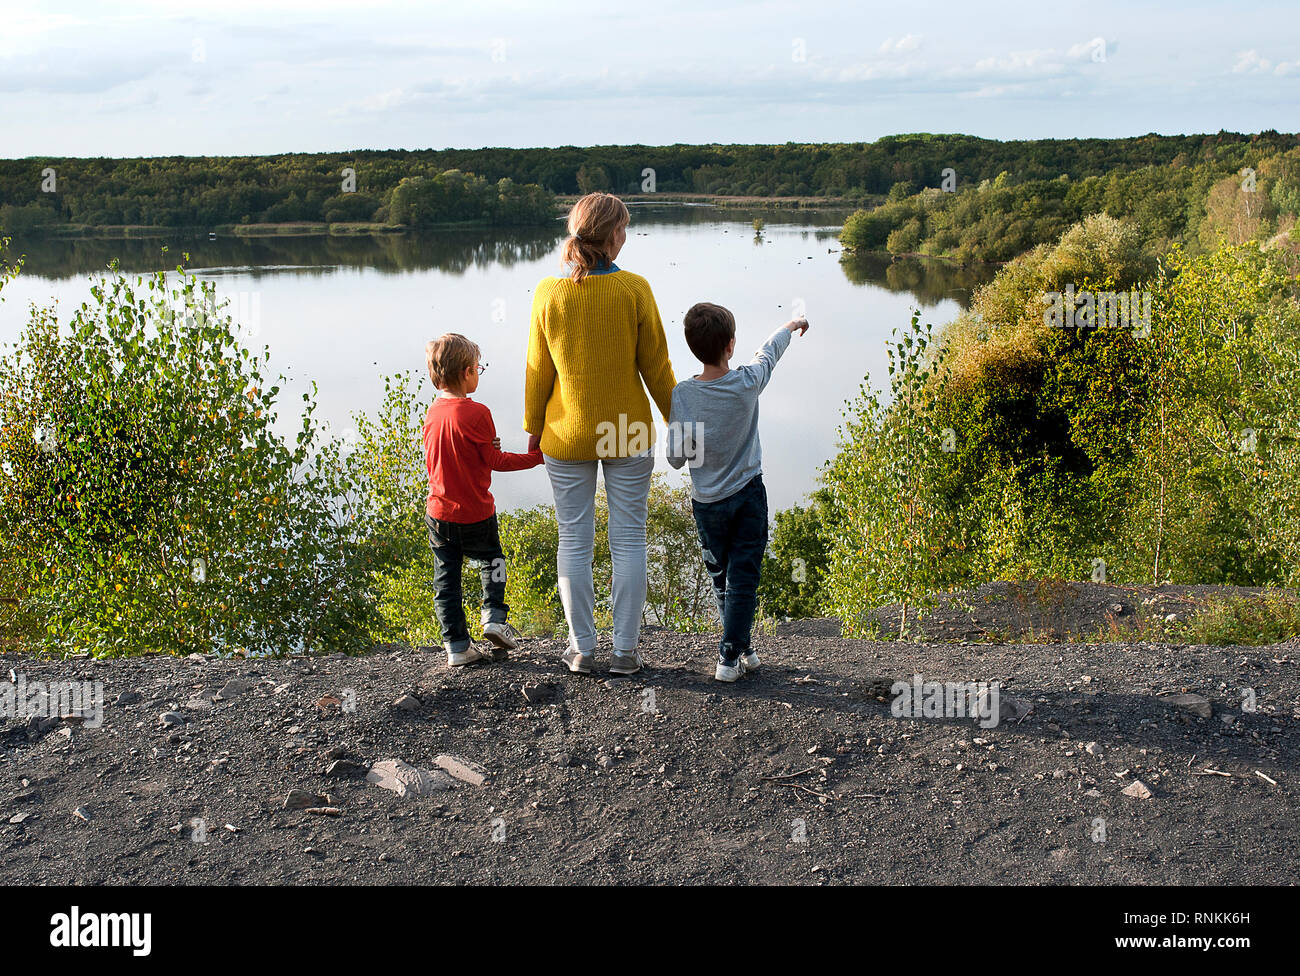 Woman, mother with her two children, holding hands, facing the lake ' Lac de la mare ' in Goriaux, in the forest of Raismes-Saint Amand Wallers, Scarp Stock Photo